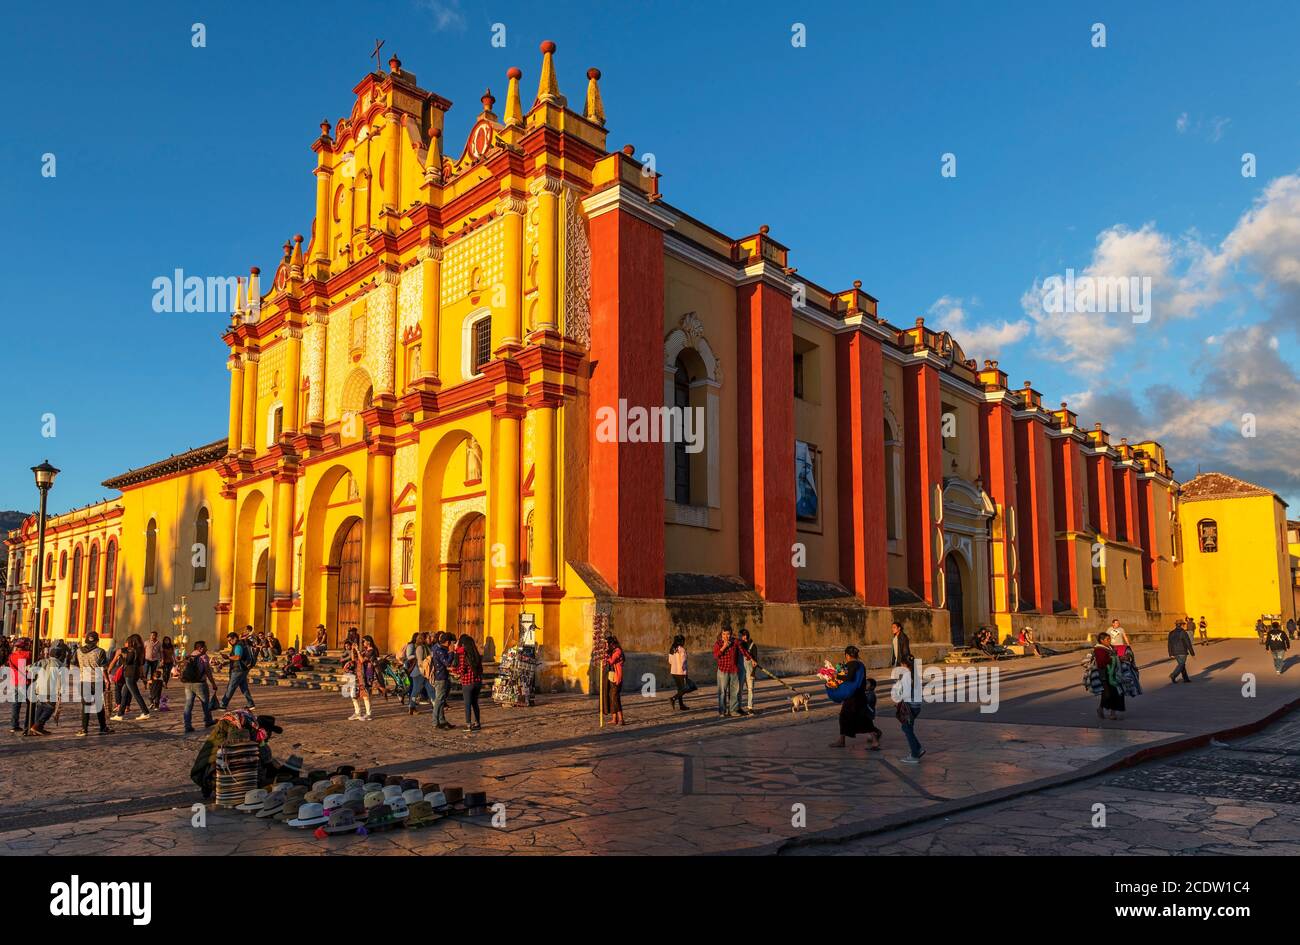 Mexican city life with street vendors and people by the Cathedral facade at sunset, San Cristobal de las Casas, Mexico. Stock Photo